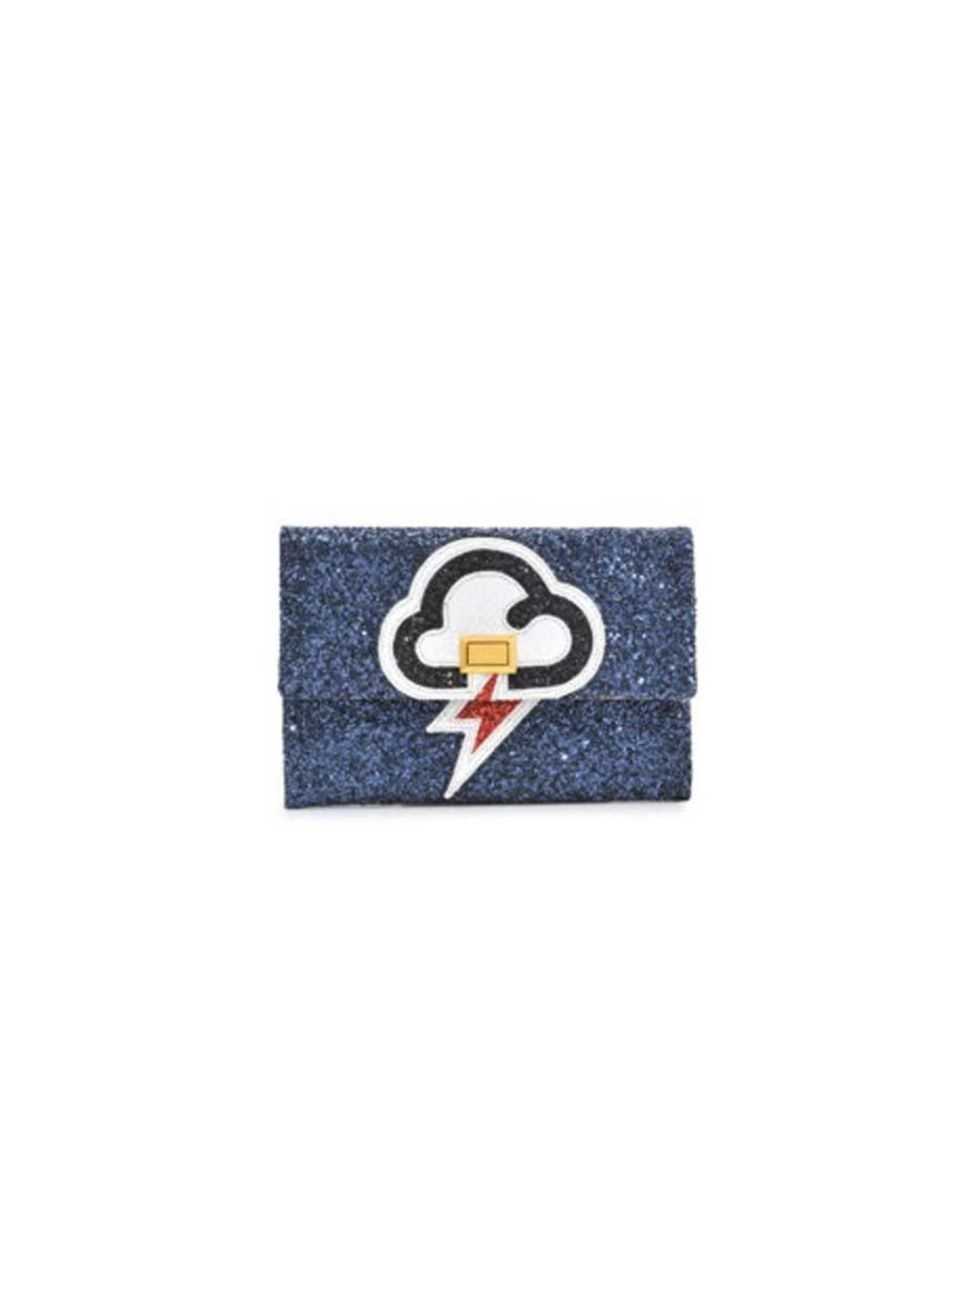 <p>This is your bank holiday weather report...</p>

<p>Anya Hindmarch clutch, £395 at <a href="http://www.monnierfreres.co.uk/valorie-lightning-clutch-HIN003017-uk.html" target="_blank">Monnier Frères</a></p>